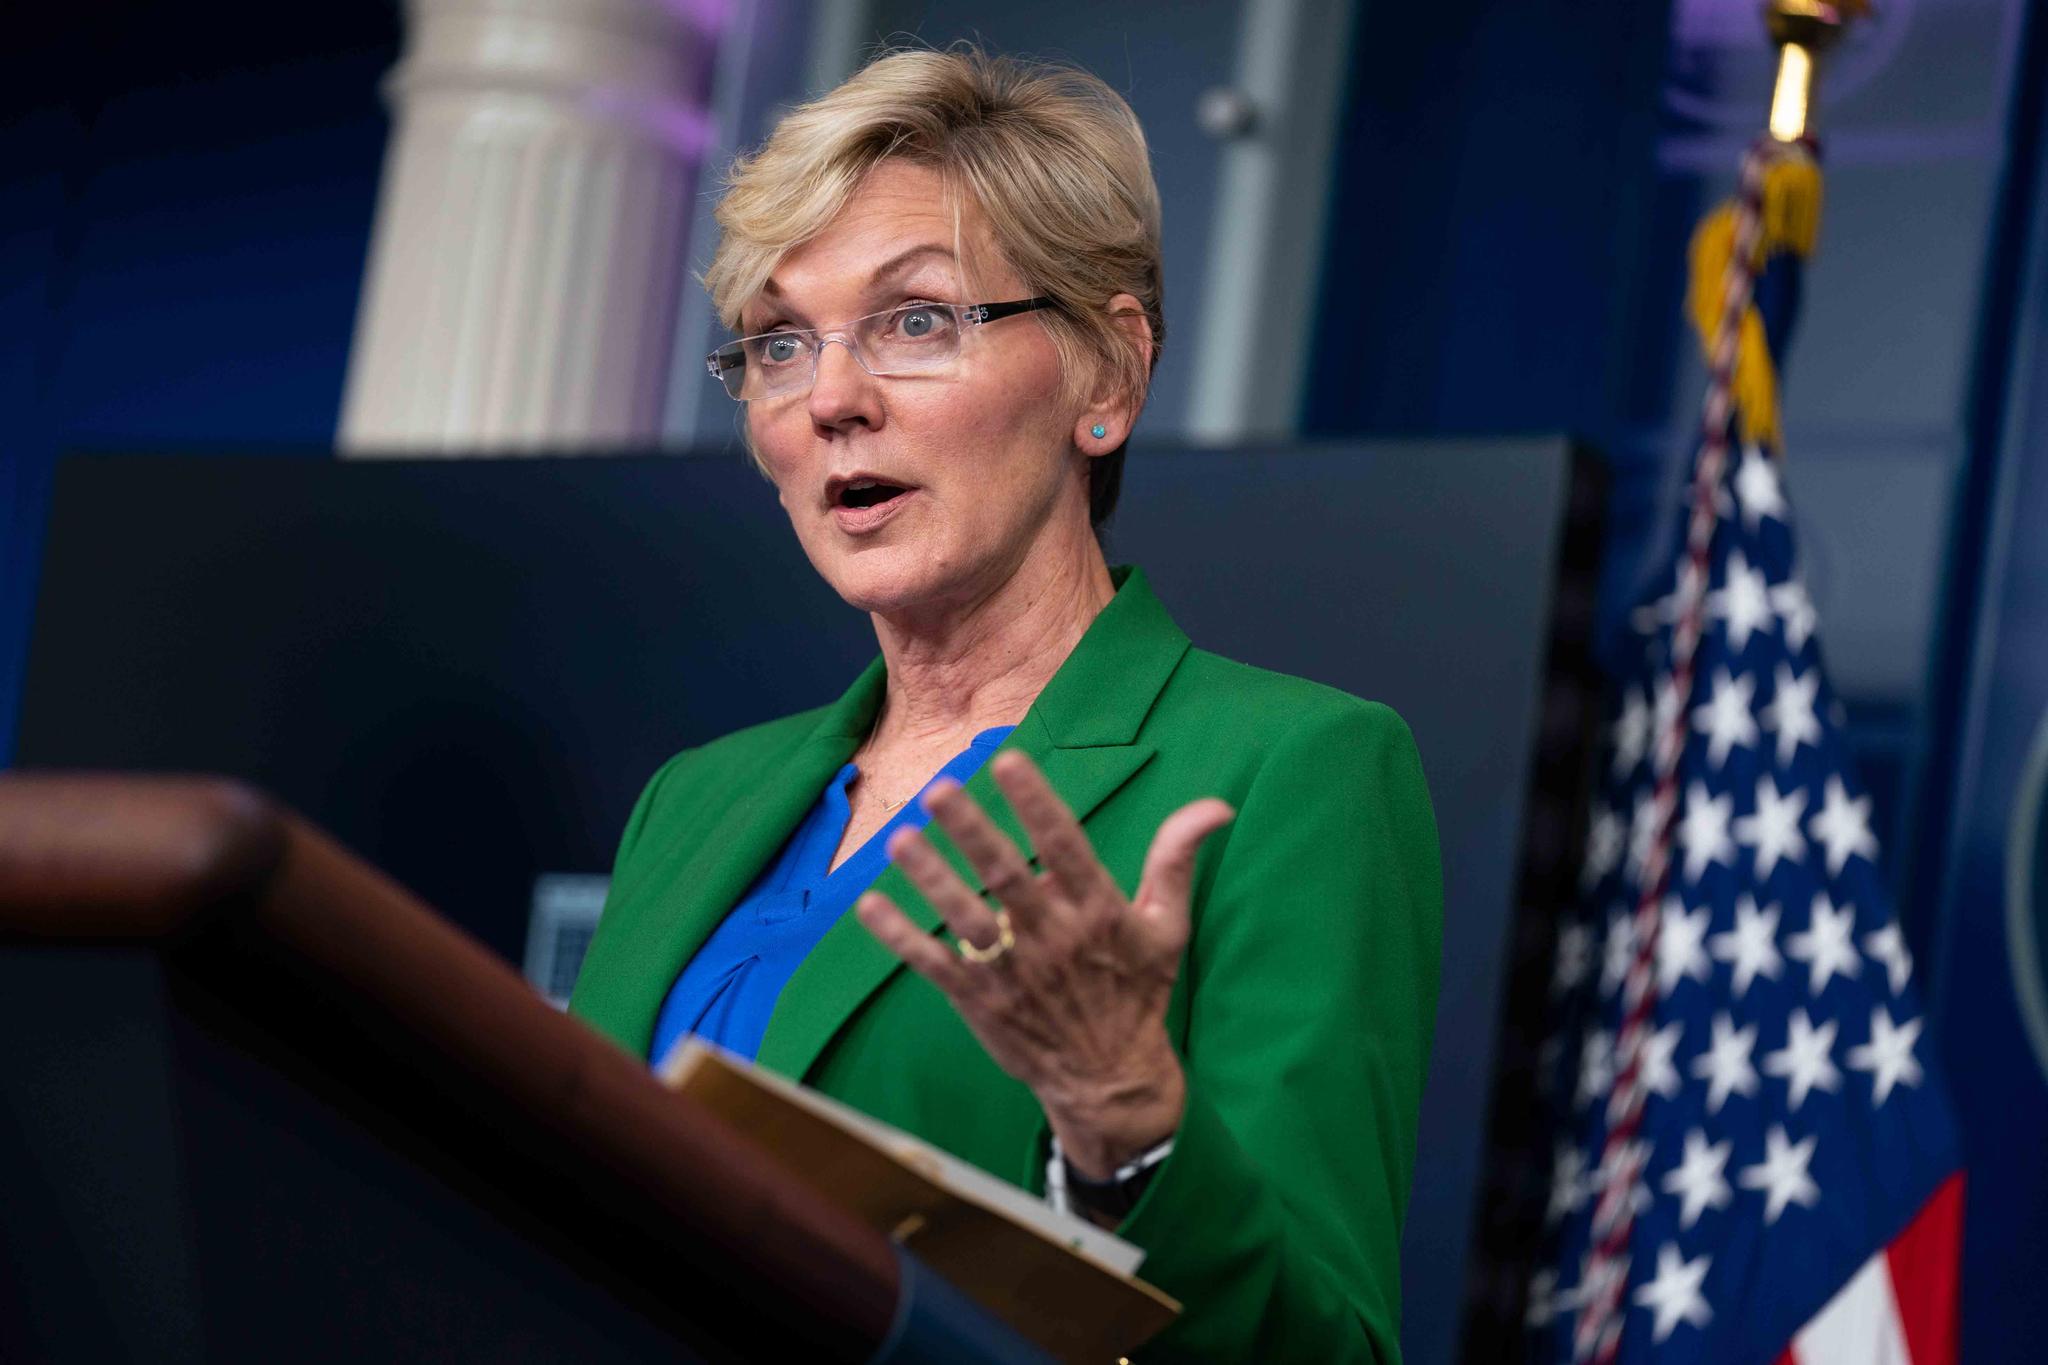 Energy Secretary Jennifer Granholm speaks during a press briefing at the White House, Tuesday, May 11, 2021, in Washington.